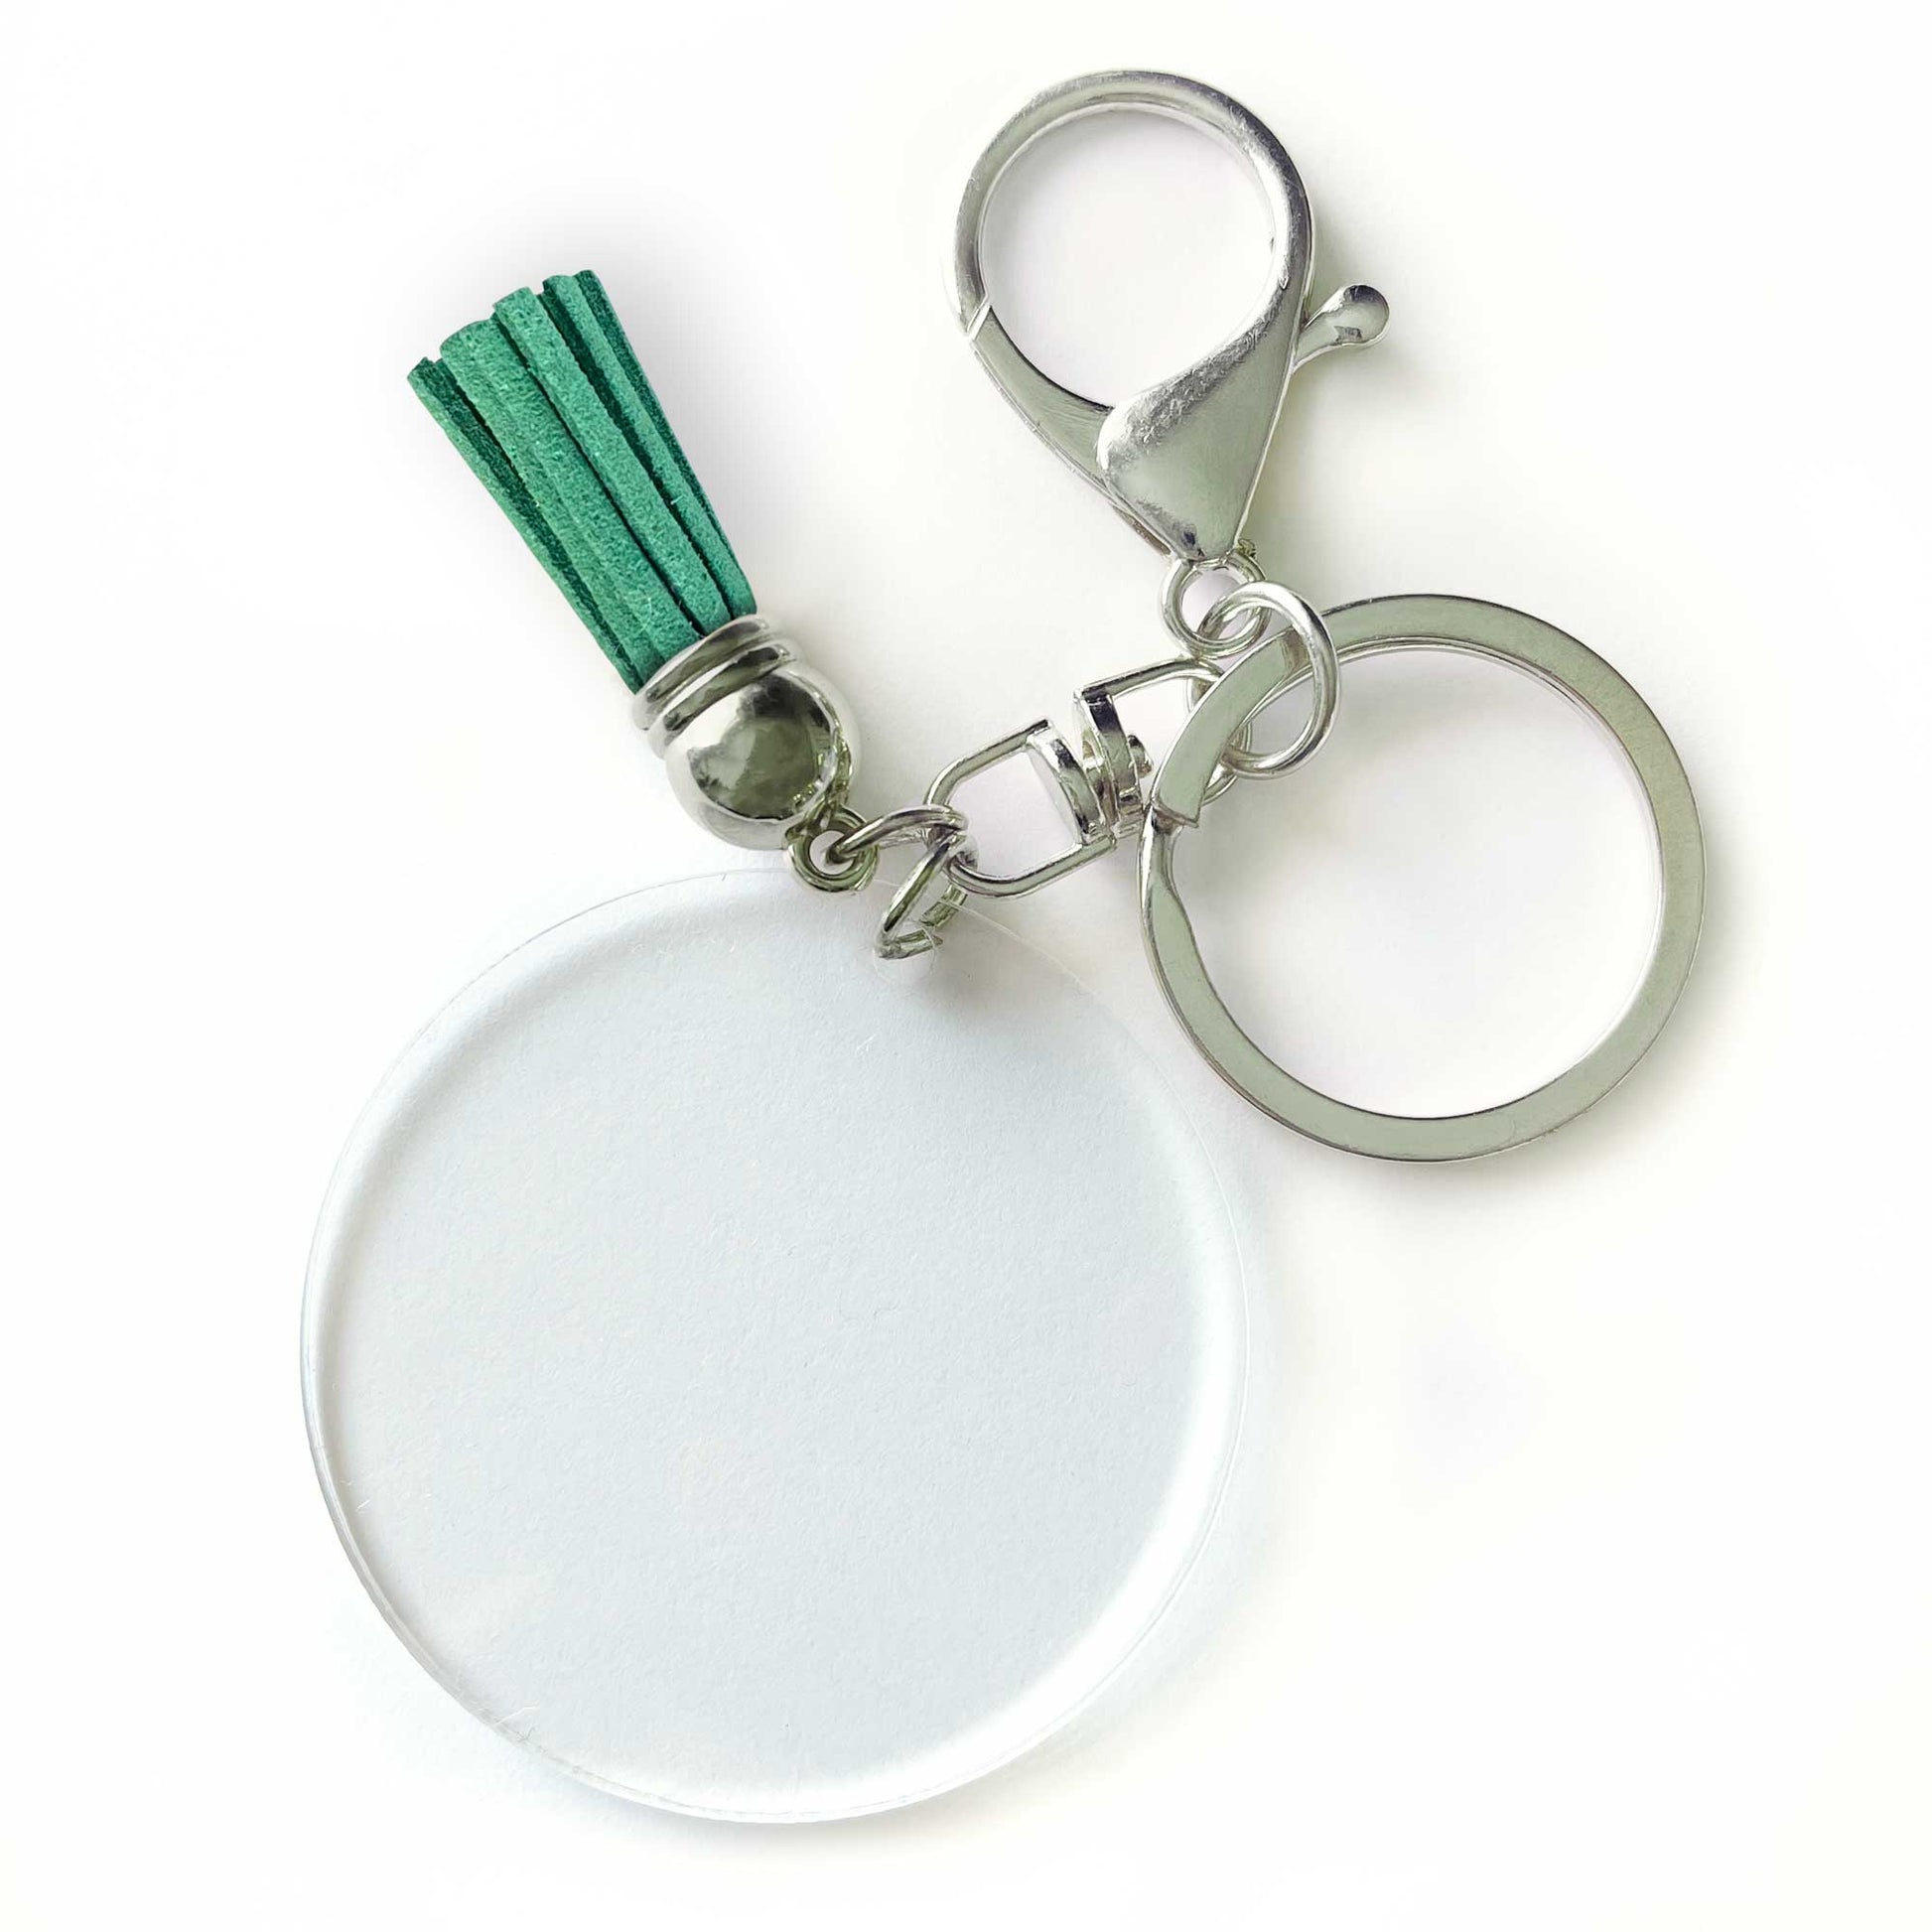 Caluya Design Silver Blank Keychain for Craft & DIY Project Red Wine